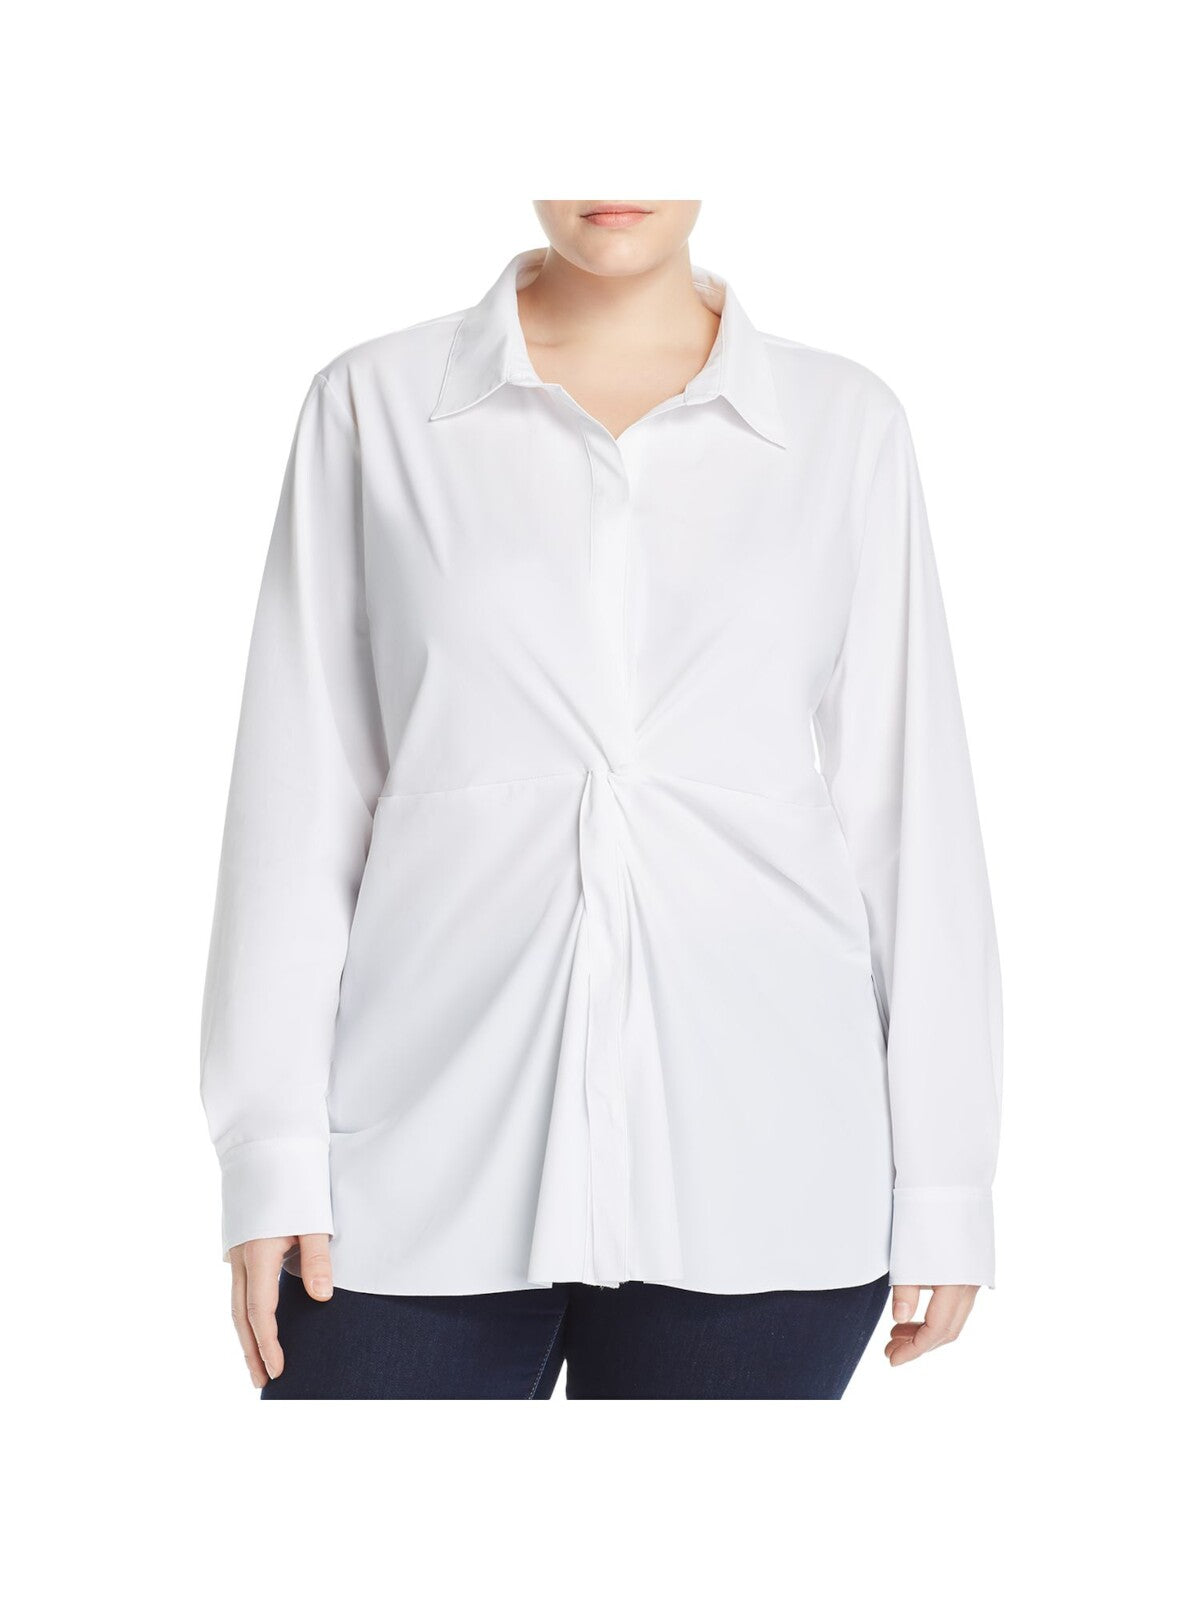 LYSSE Womens Cuffed Sleeve Collared Wear To Work Button Up Top